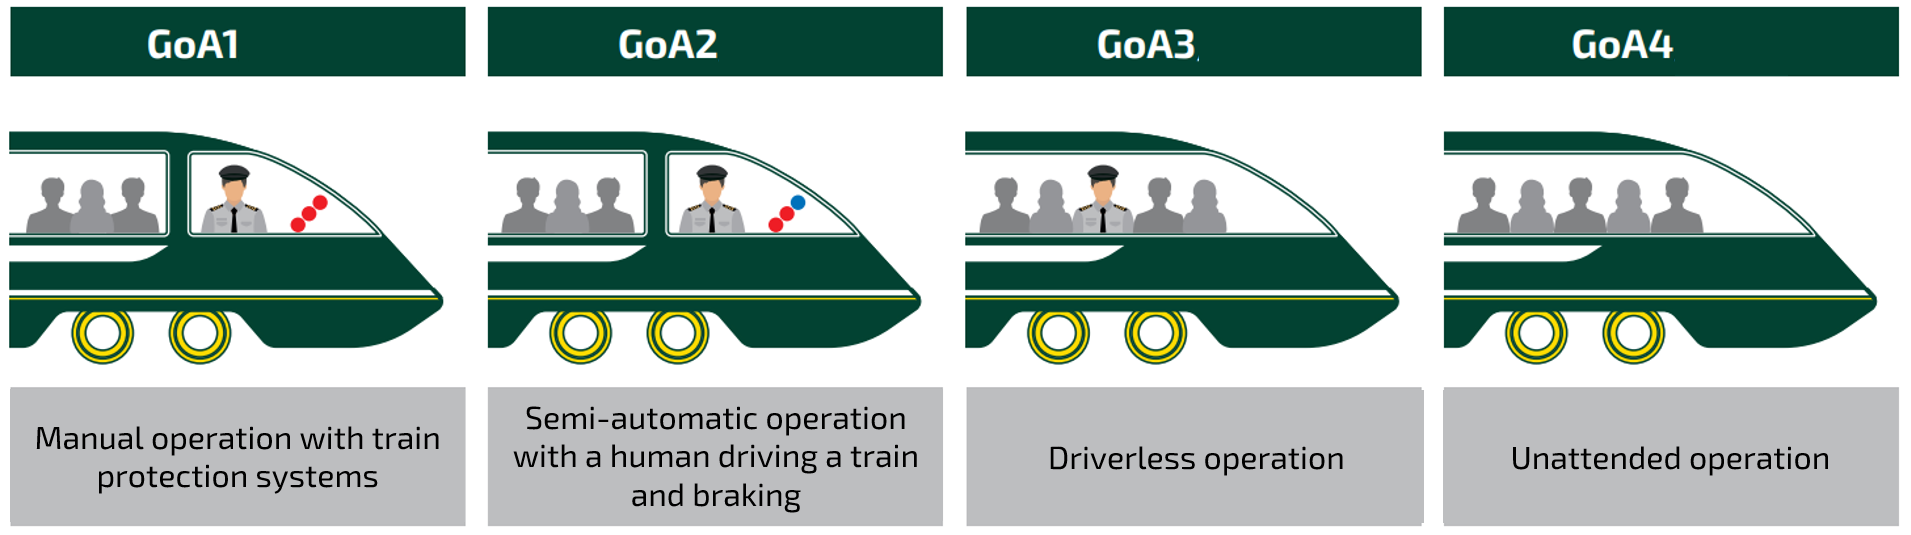 Grades of automation in rail transport 